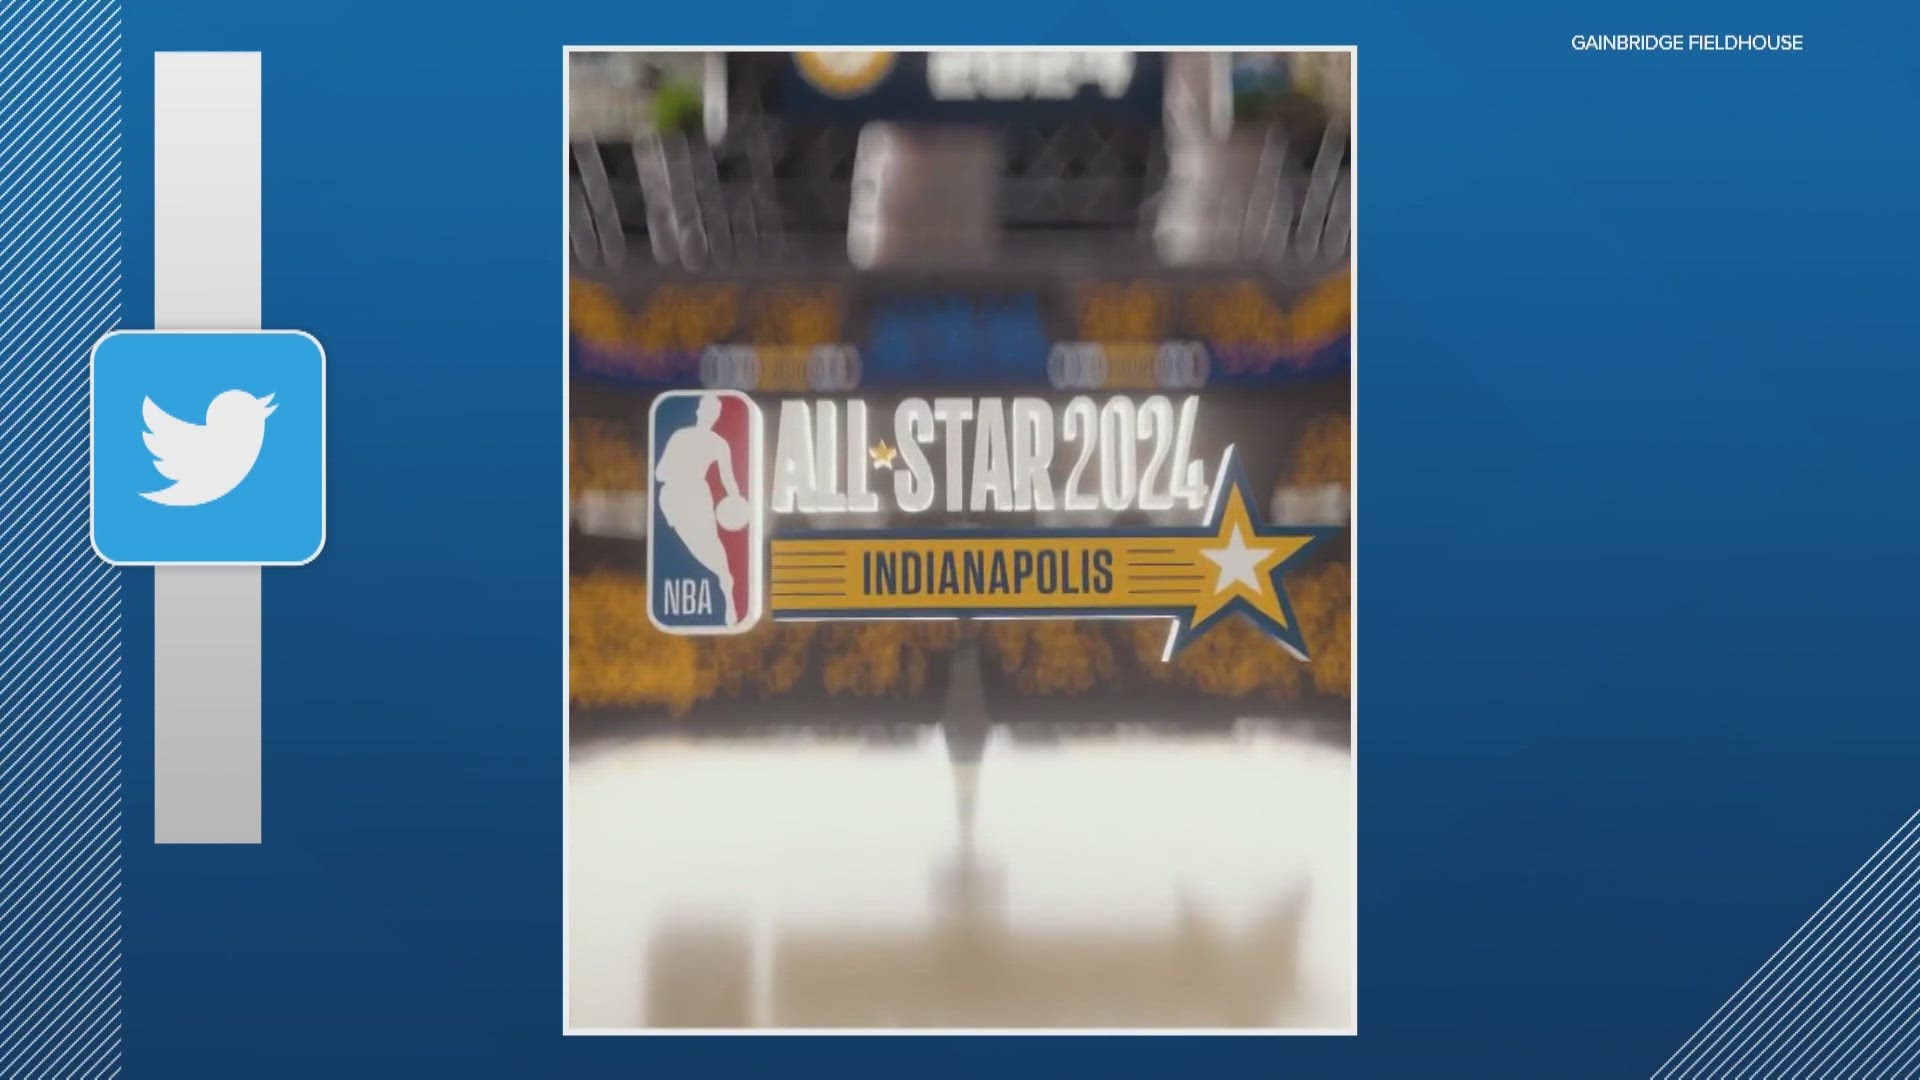 Tickets on sale for NBA All-Star festivities in Indianapolis